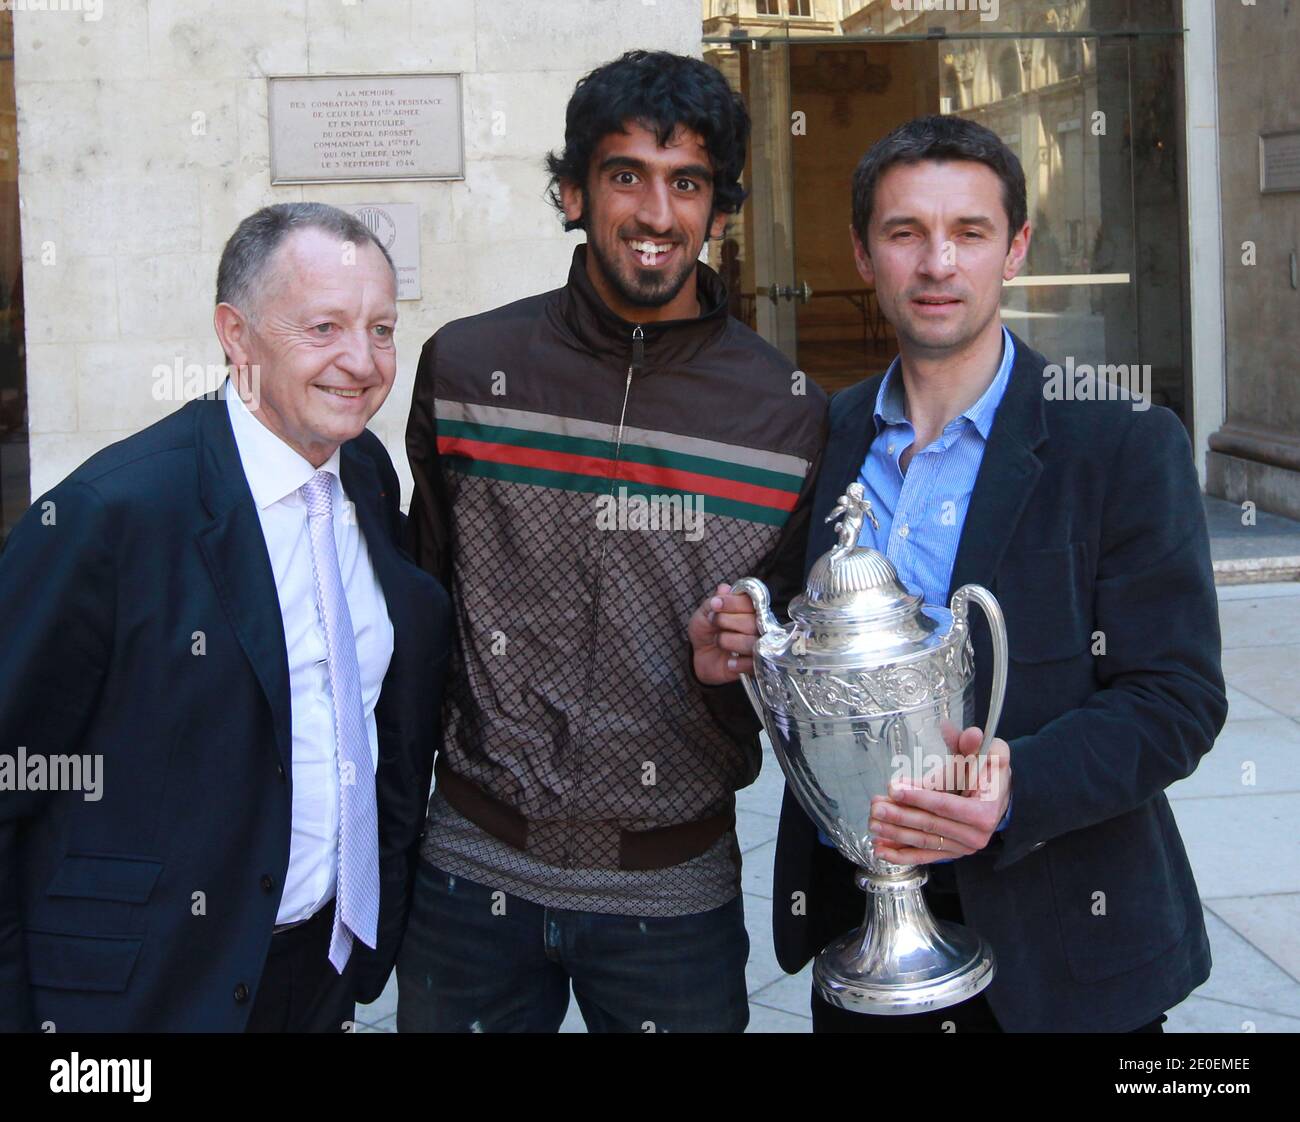 OL's new player Hamdan Al Kamali, president Jean Michel Aulas and coach  Remi Garde celebrate holding the trophy in front of supporters at the City  Hall in Lyon, France on April 29,